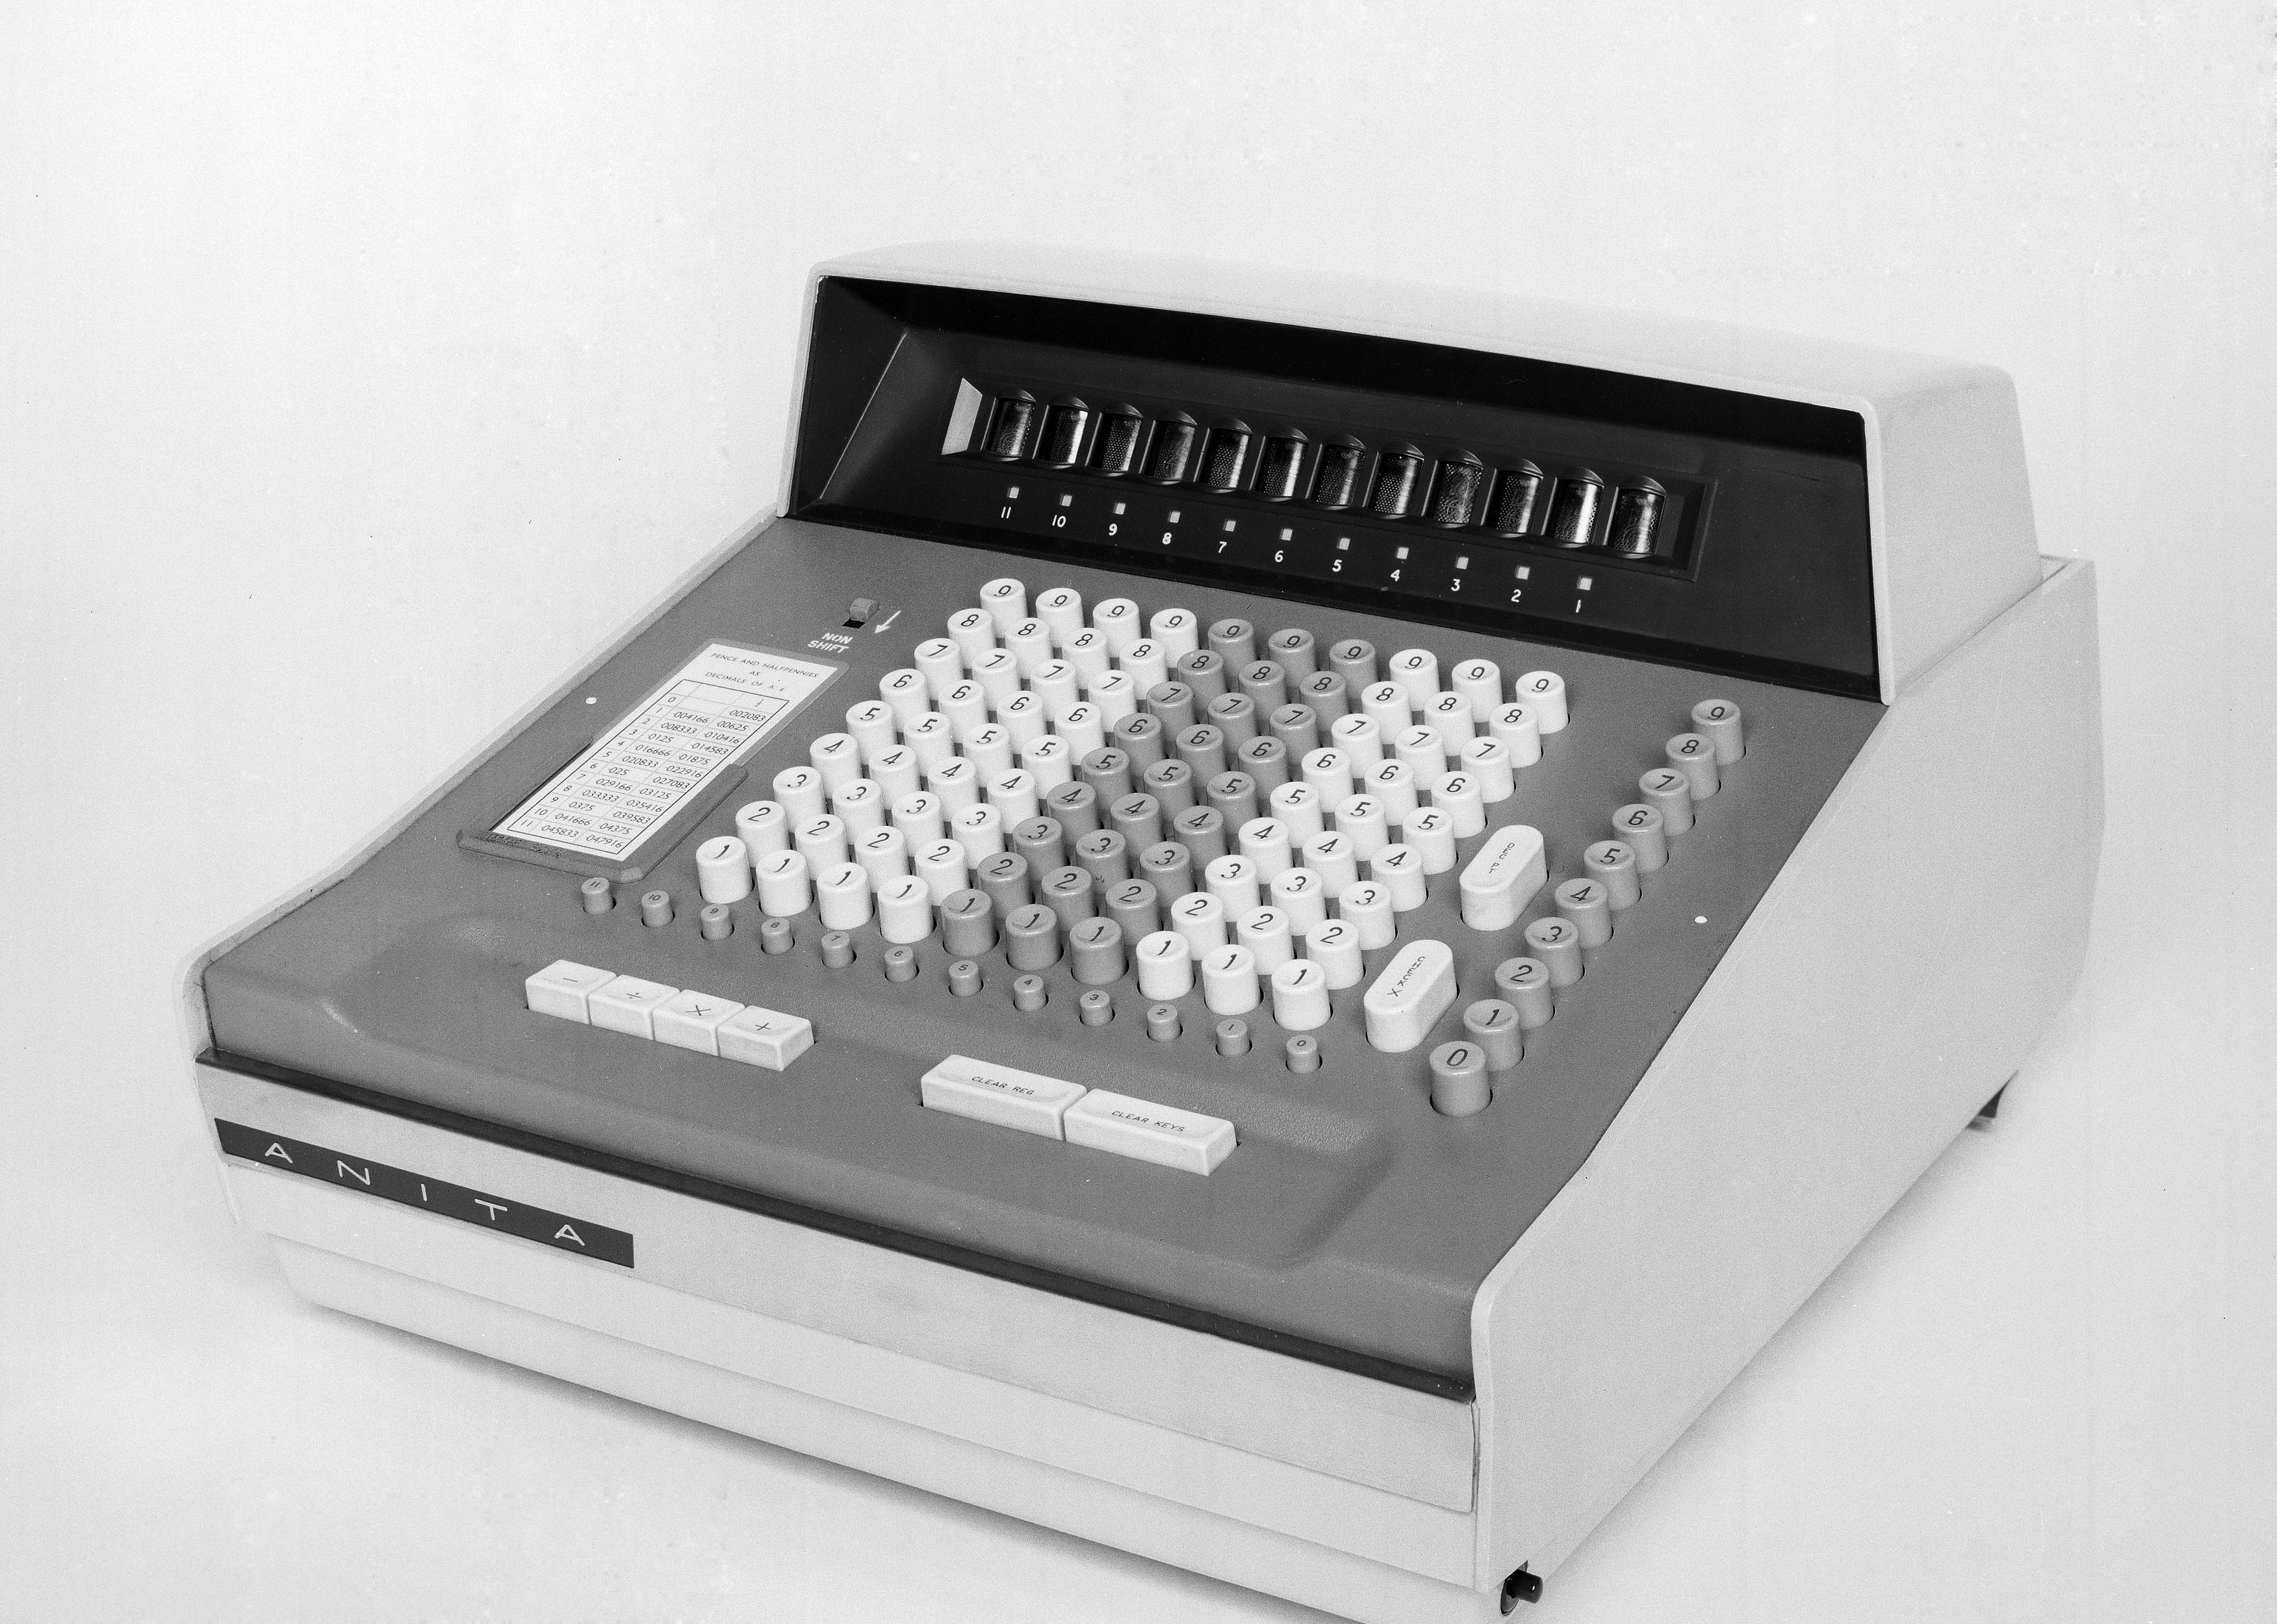 The Anita electronic desktop calculating machine with a full 10-column keyboard with separate multiplication column and 12-digit result display.